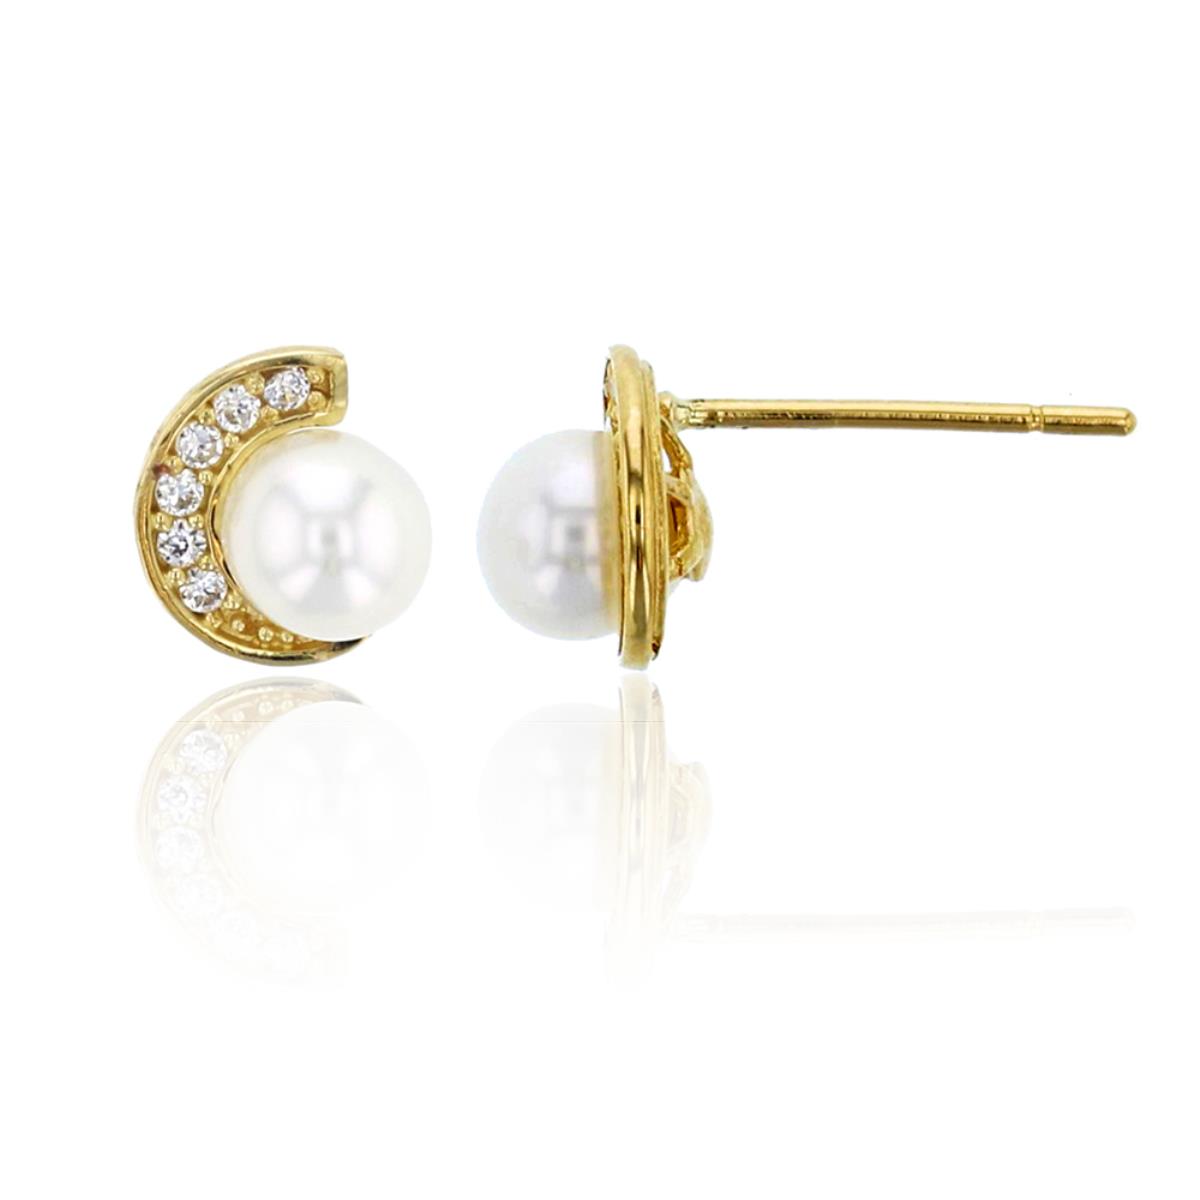 10K Yellow Gold Pave 4mm Fresh Water Pearl & CZ Moon Stud Earring